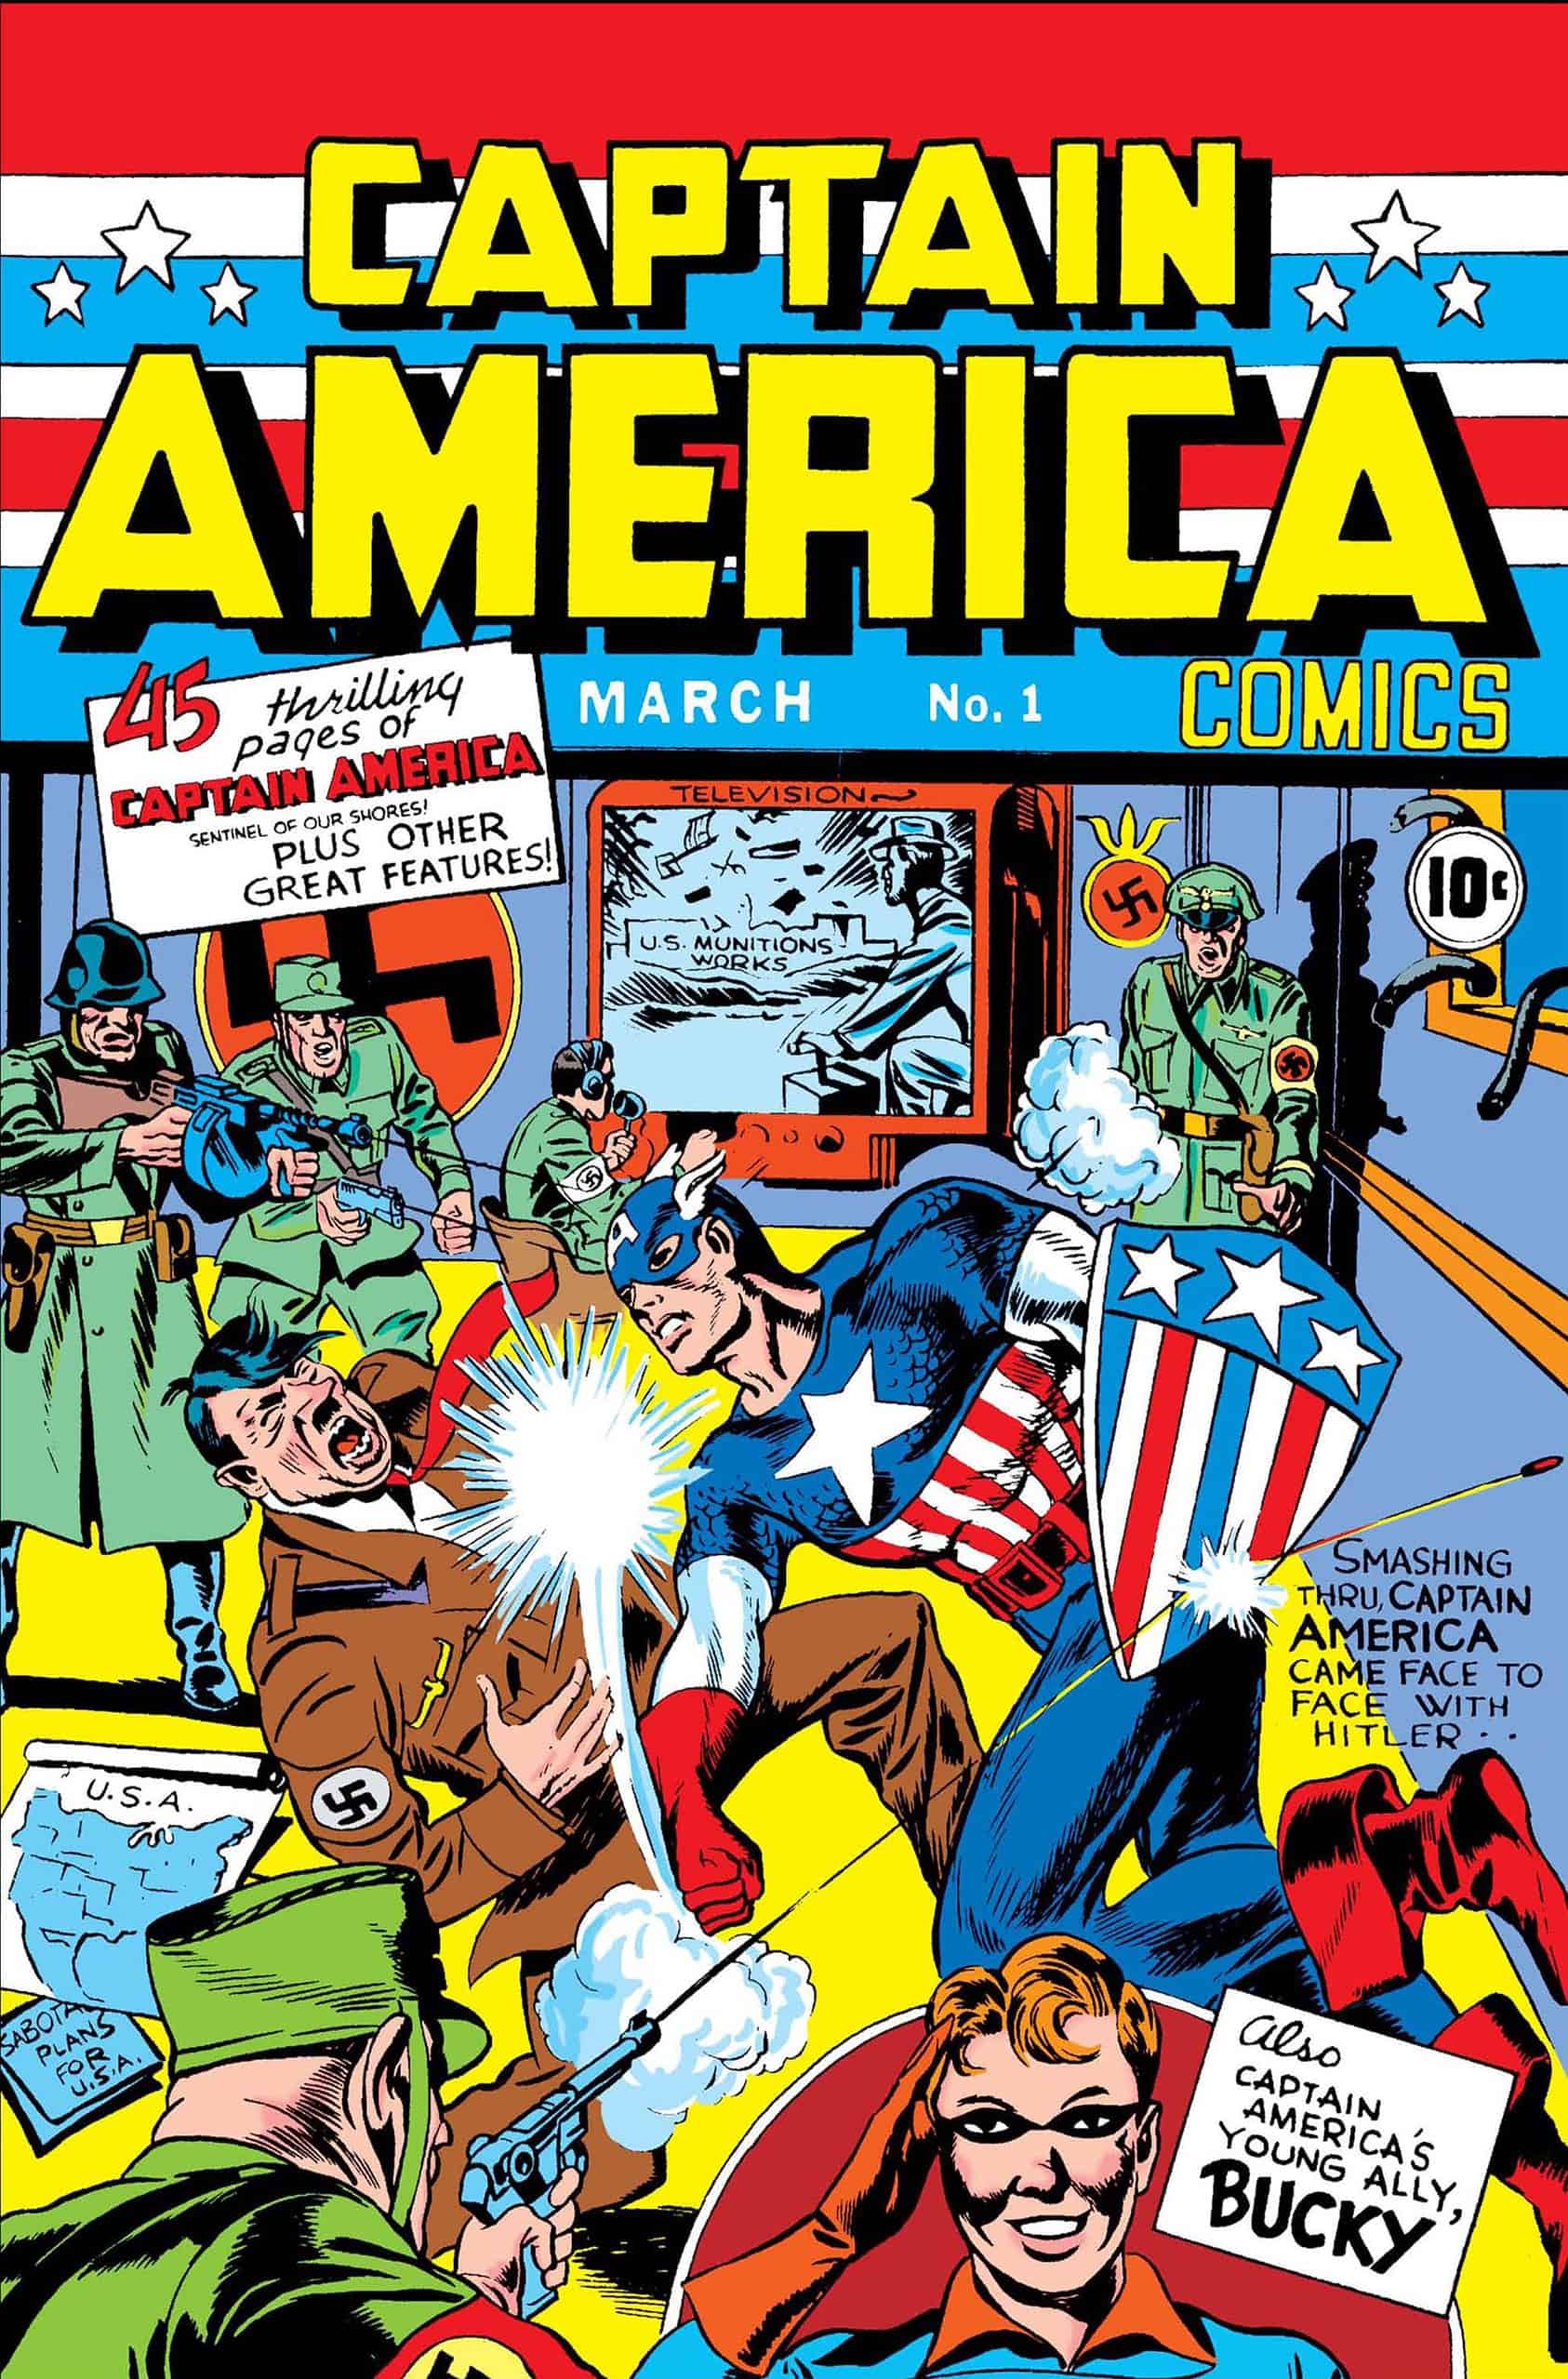 The Top 10 Most Valuable Comics of All Time